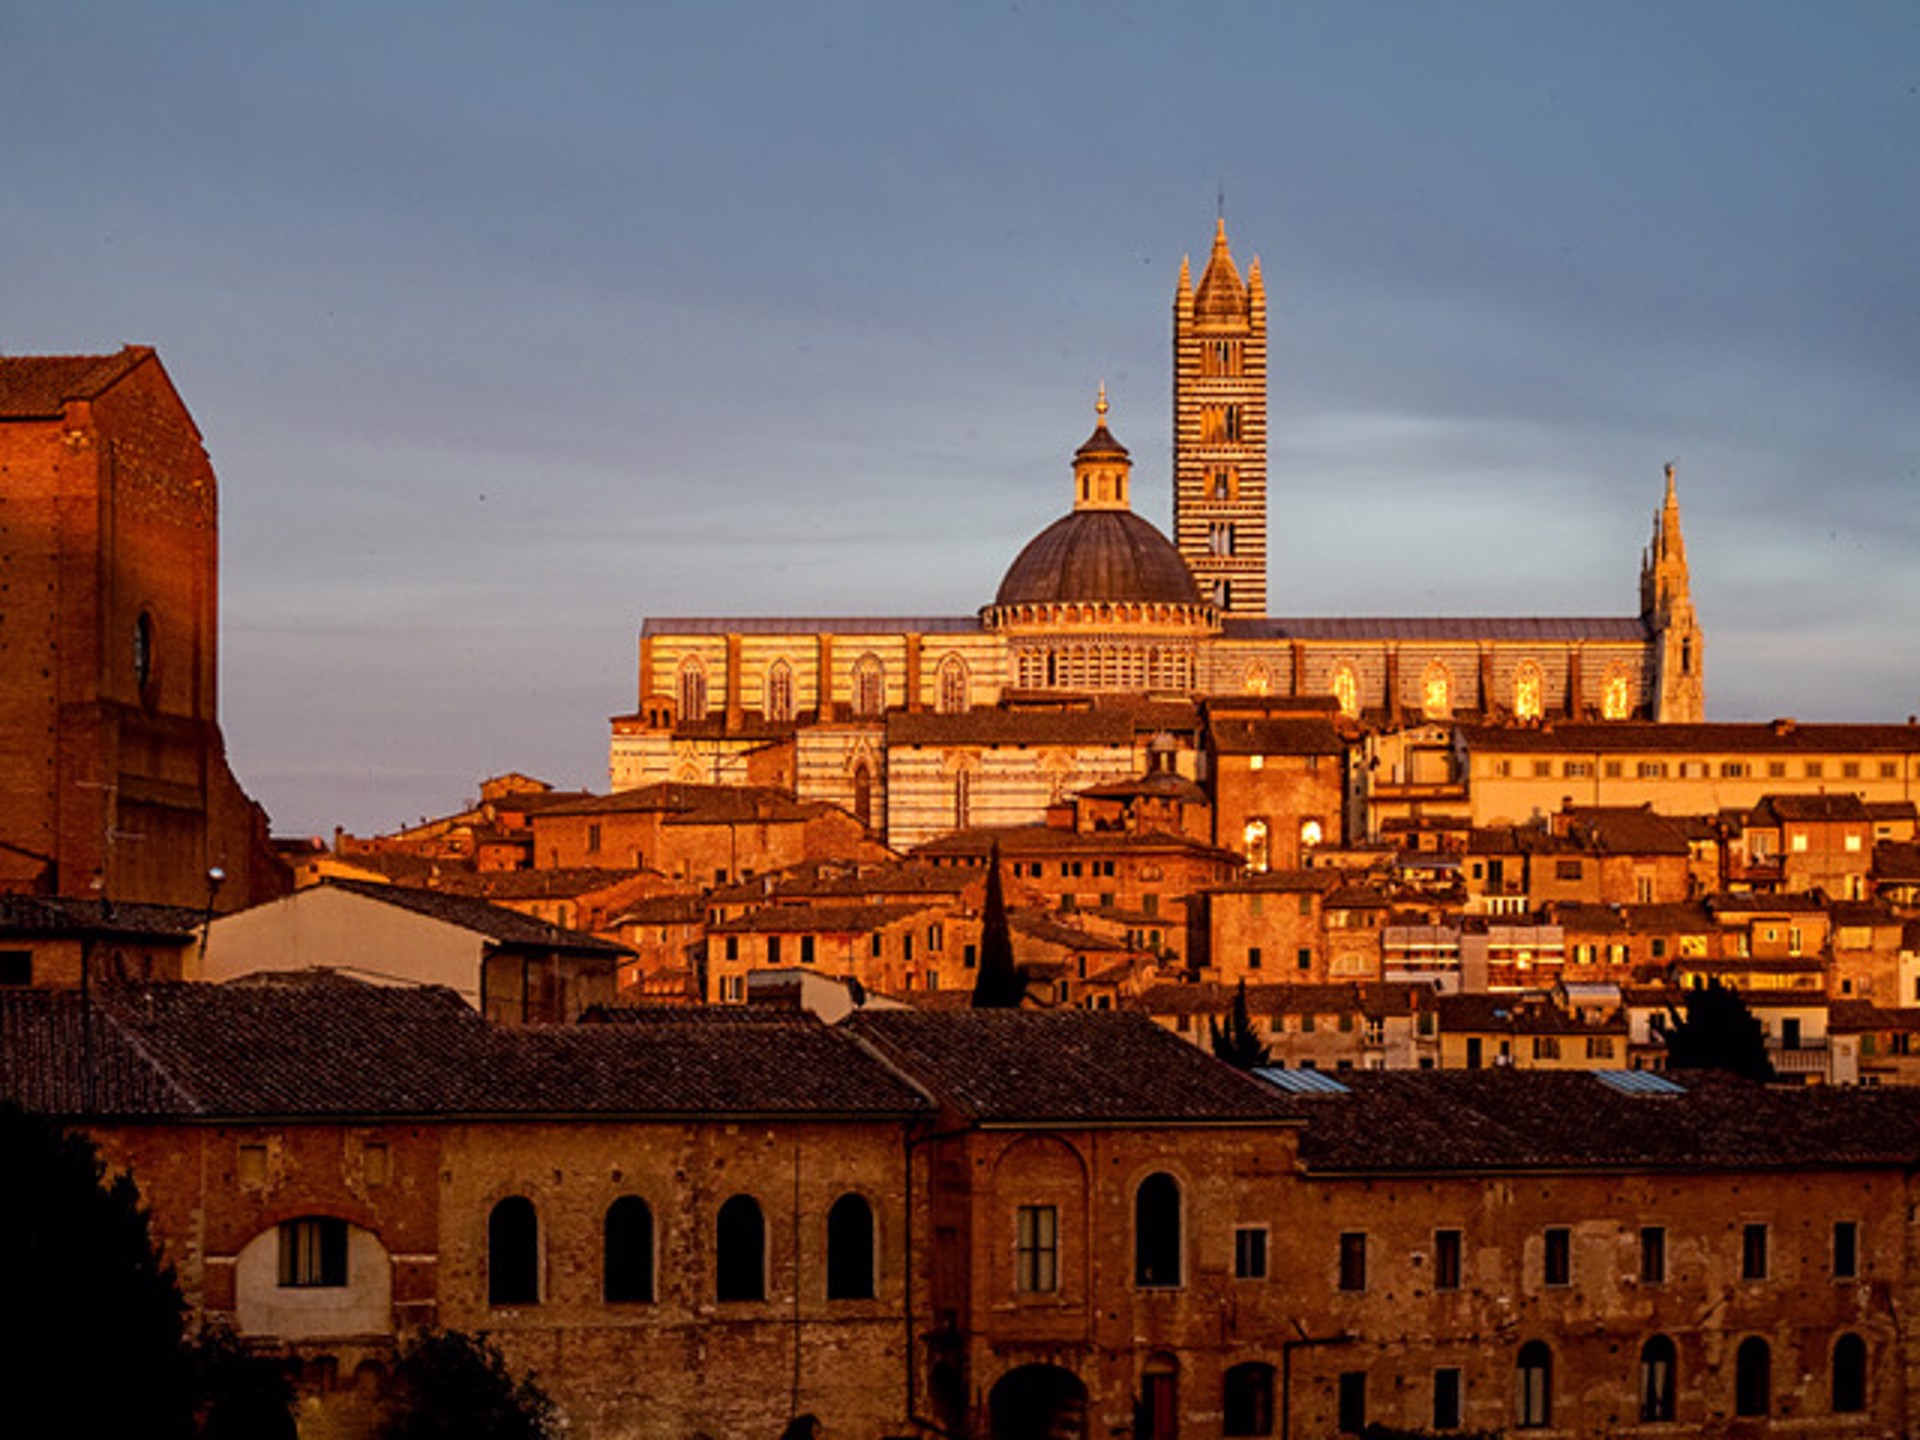 Sunset Light on the Duomo, From the Parking Lot, Siena, Italy by Lawrence McFarland